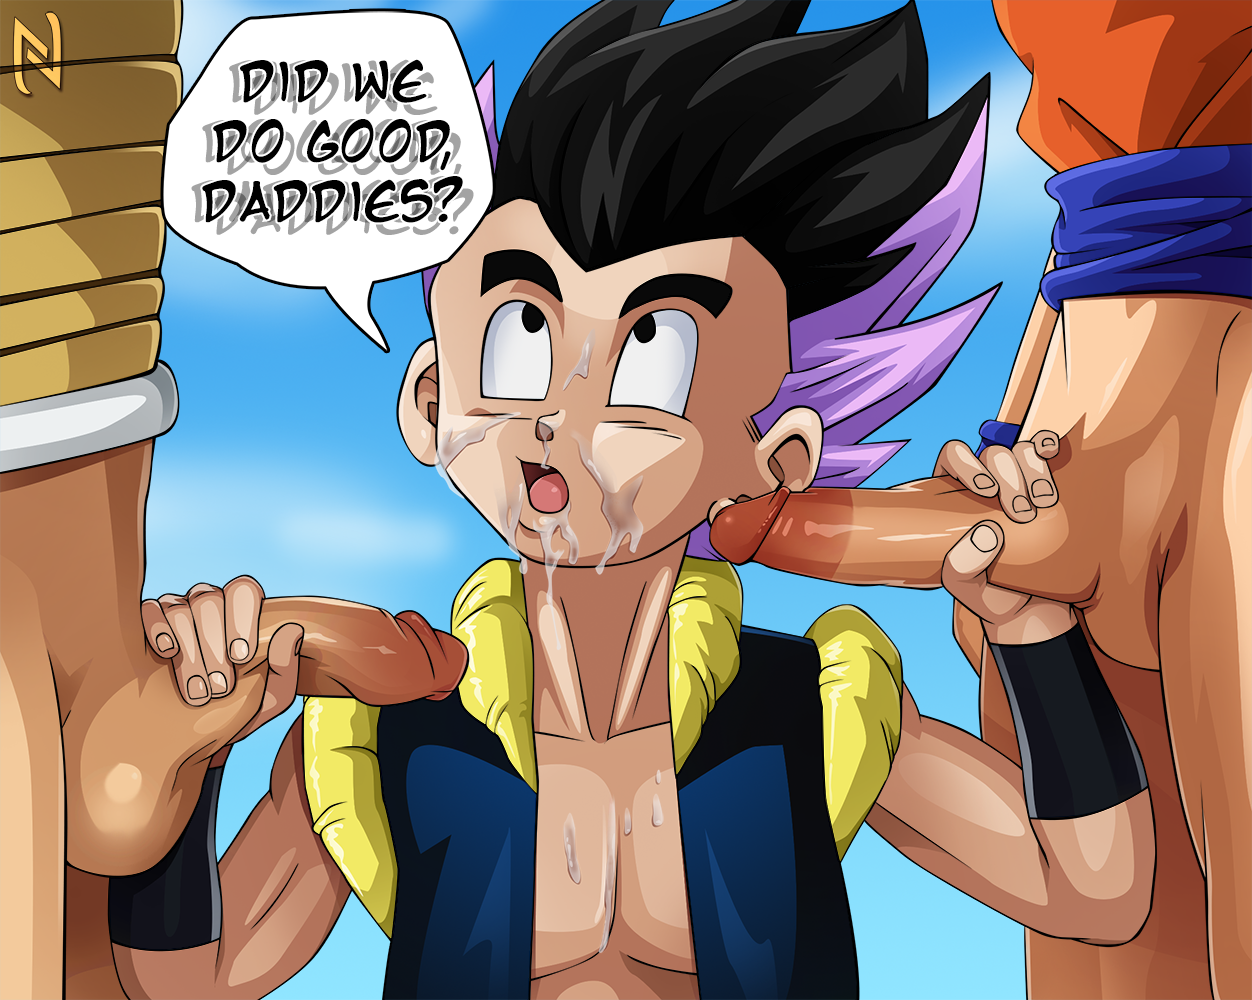 Get your kicks with trunks and goten gay porn!